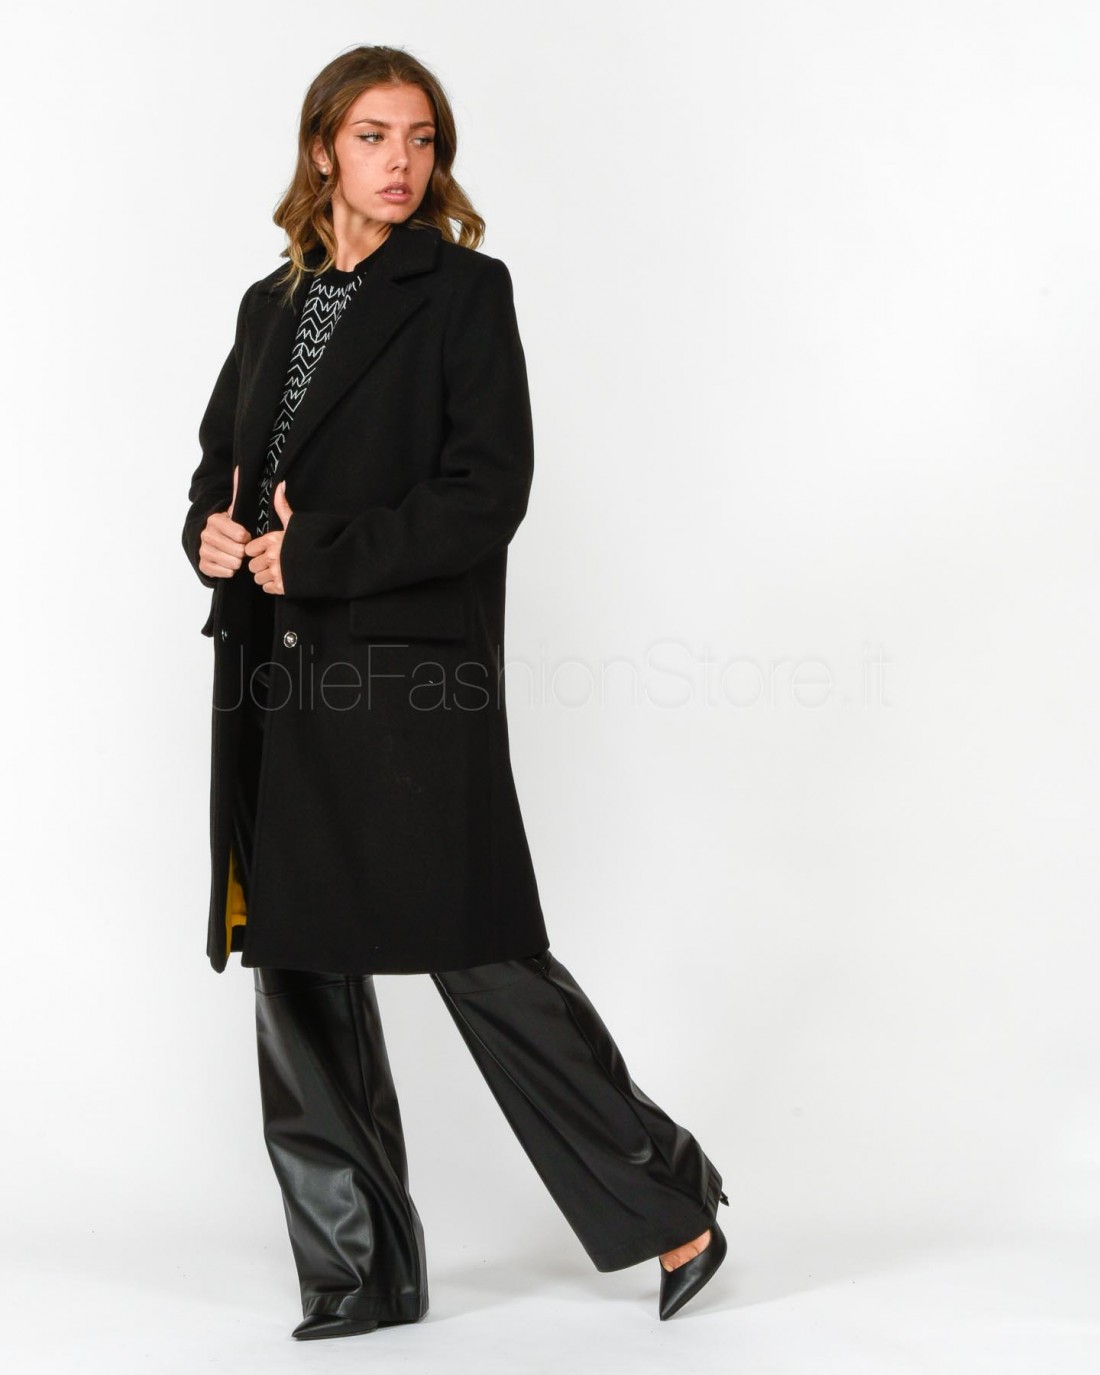 Front Street 8 Cappotto Basic in Panno Nero  30026 1000